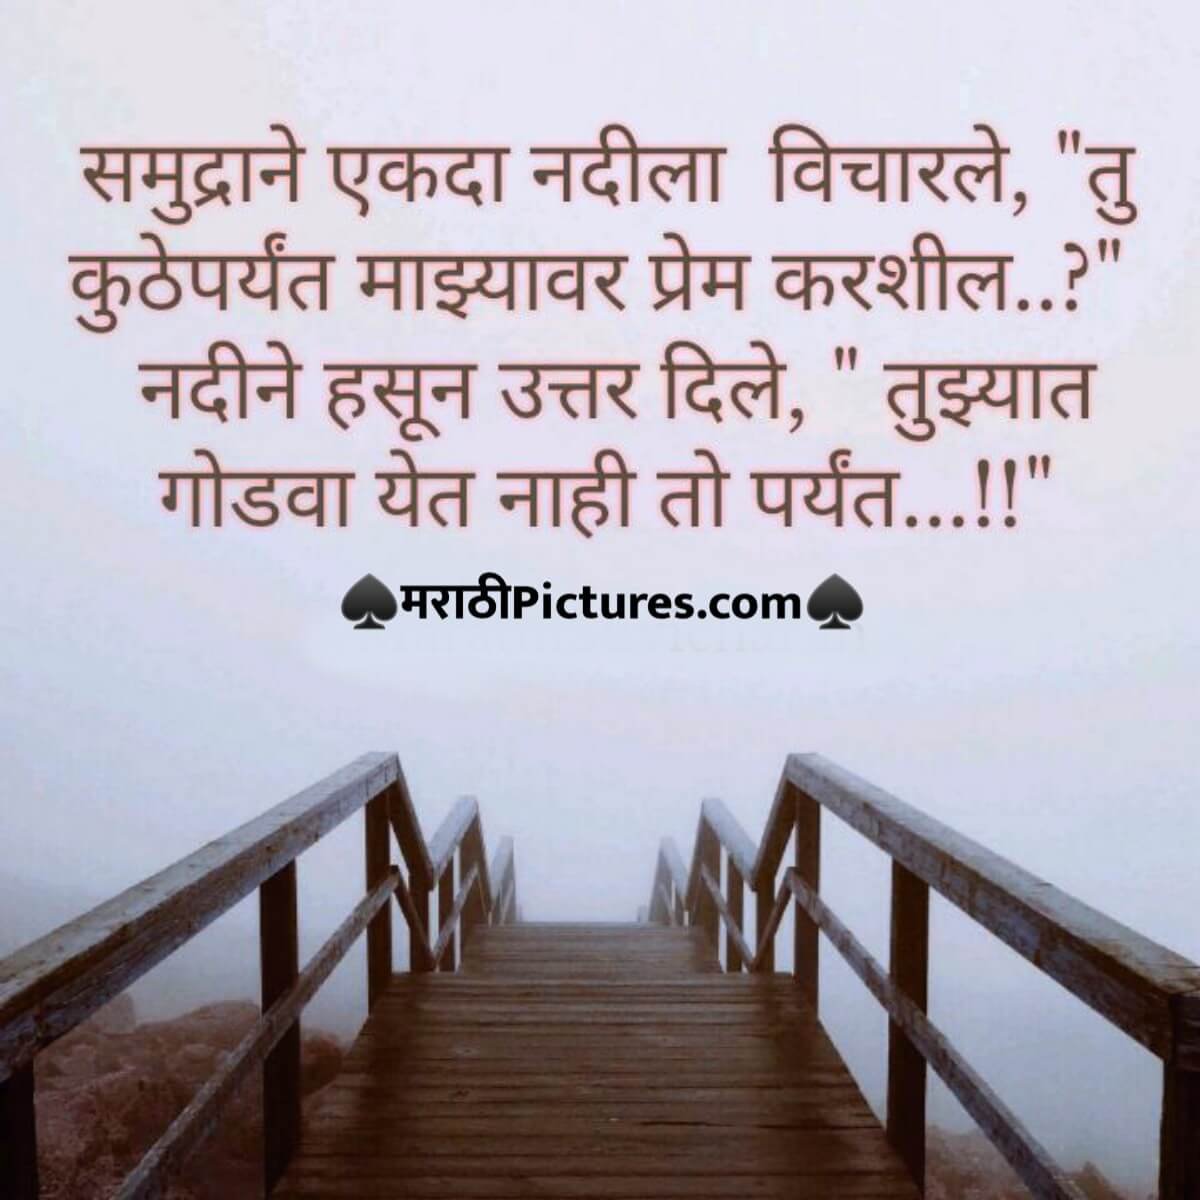 Husband Wife, boy girl love quotes in marathi